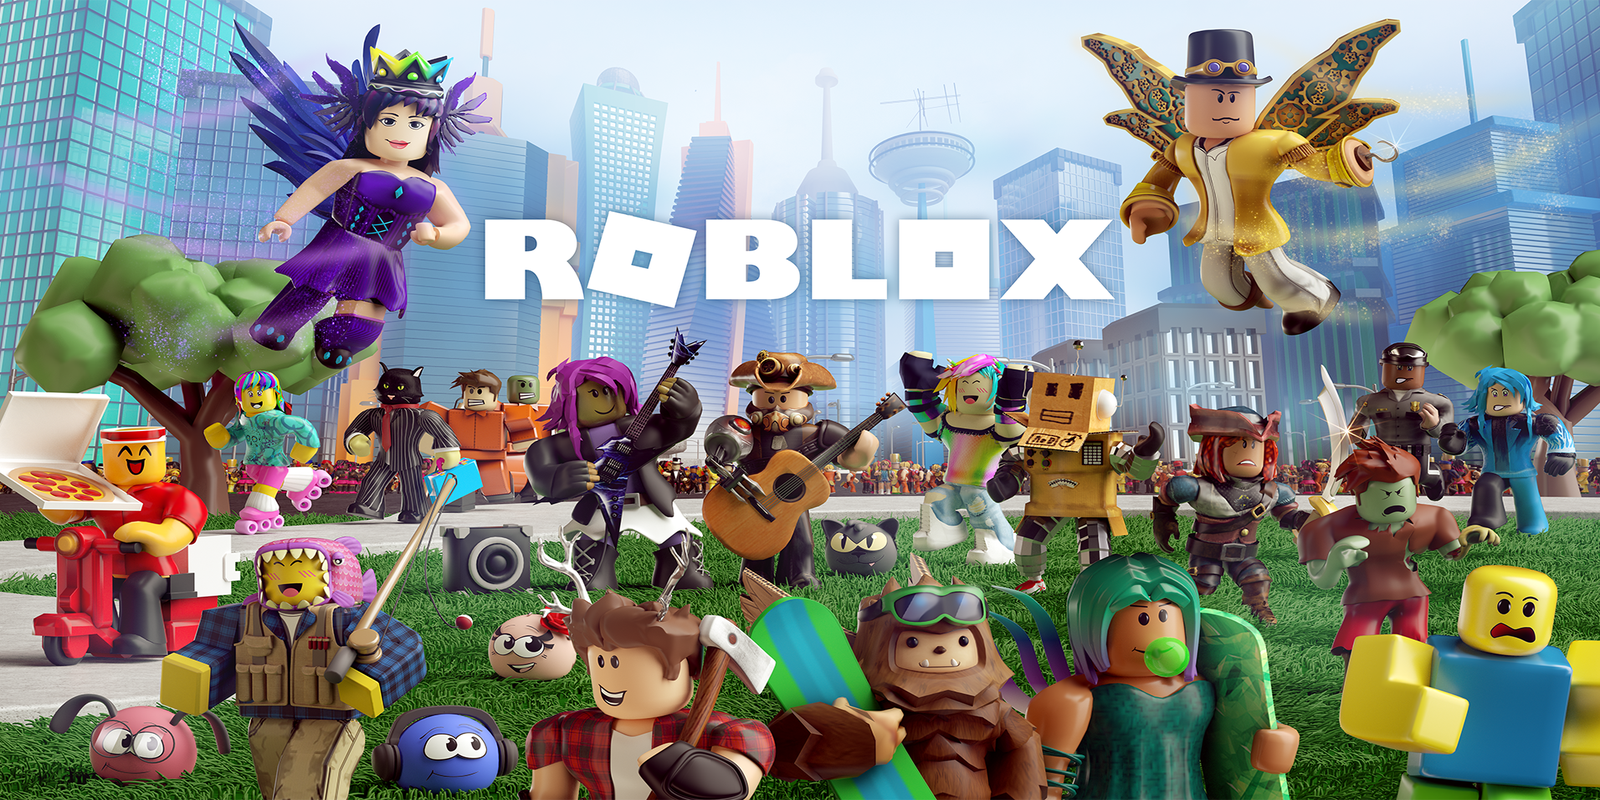 Roblox Kids Game Shows Character Being Sexually Violated Mom Warns - roblox picture png